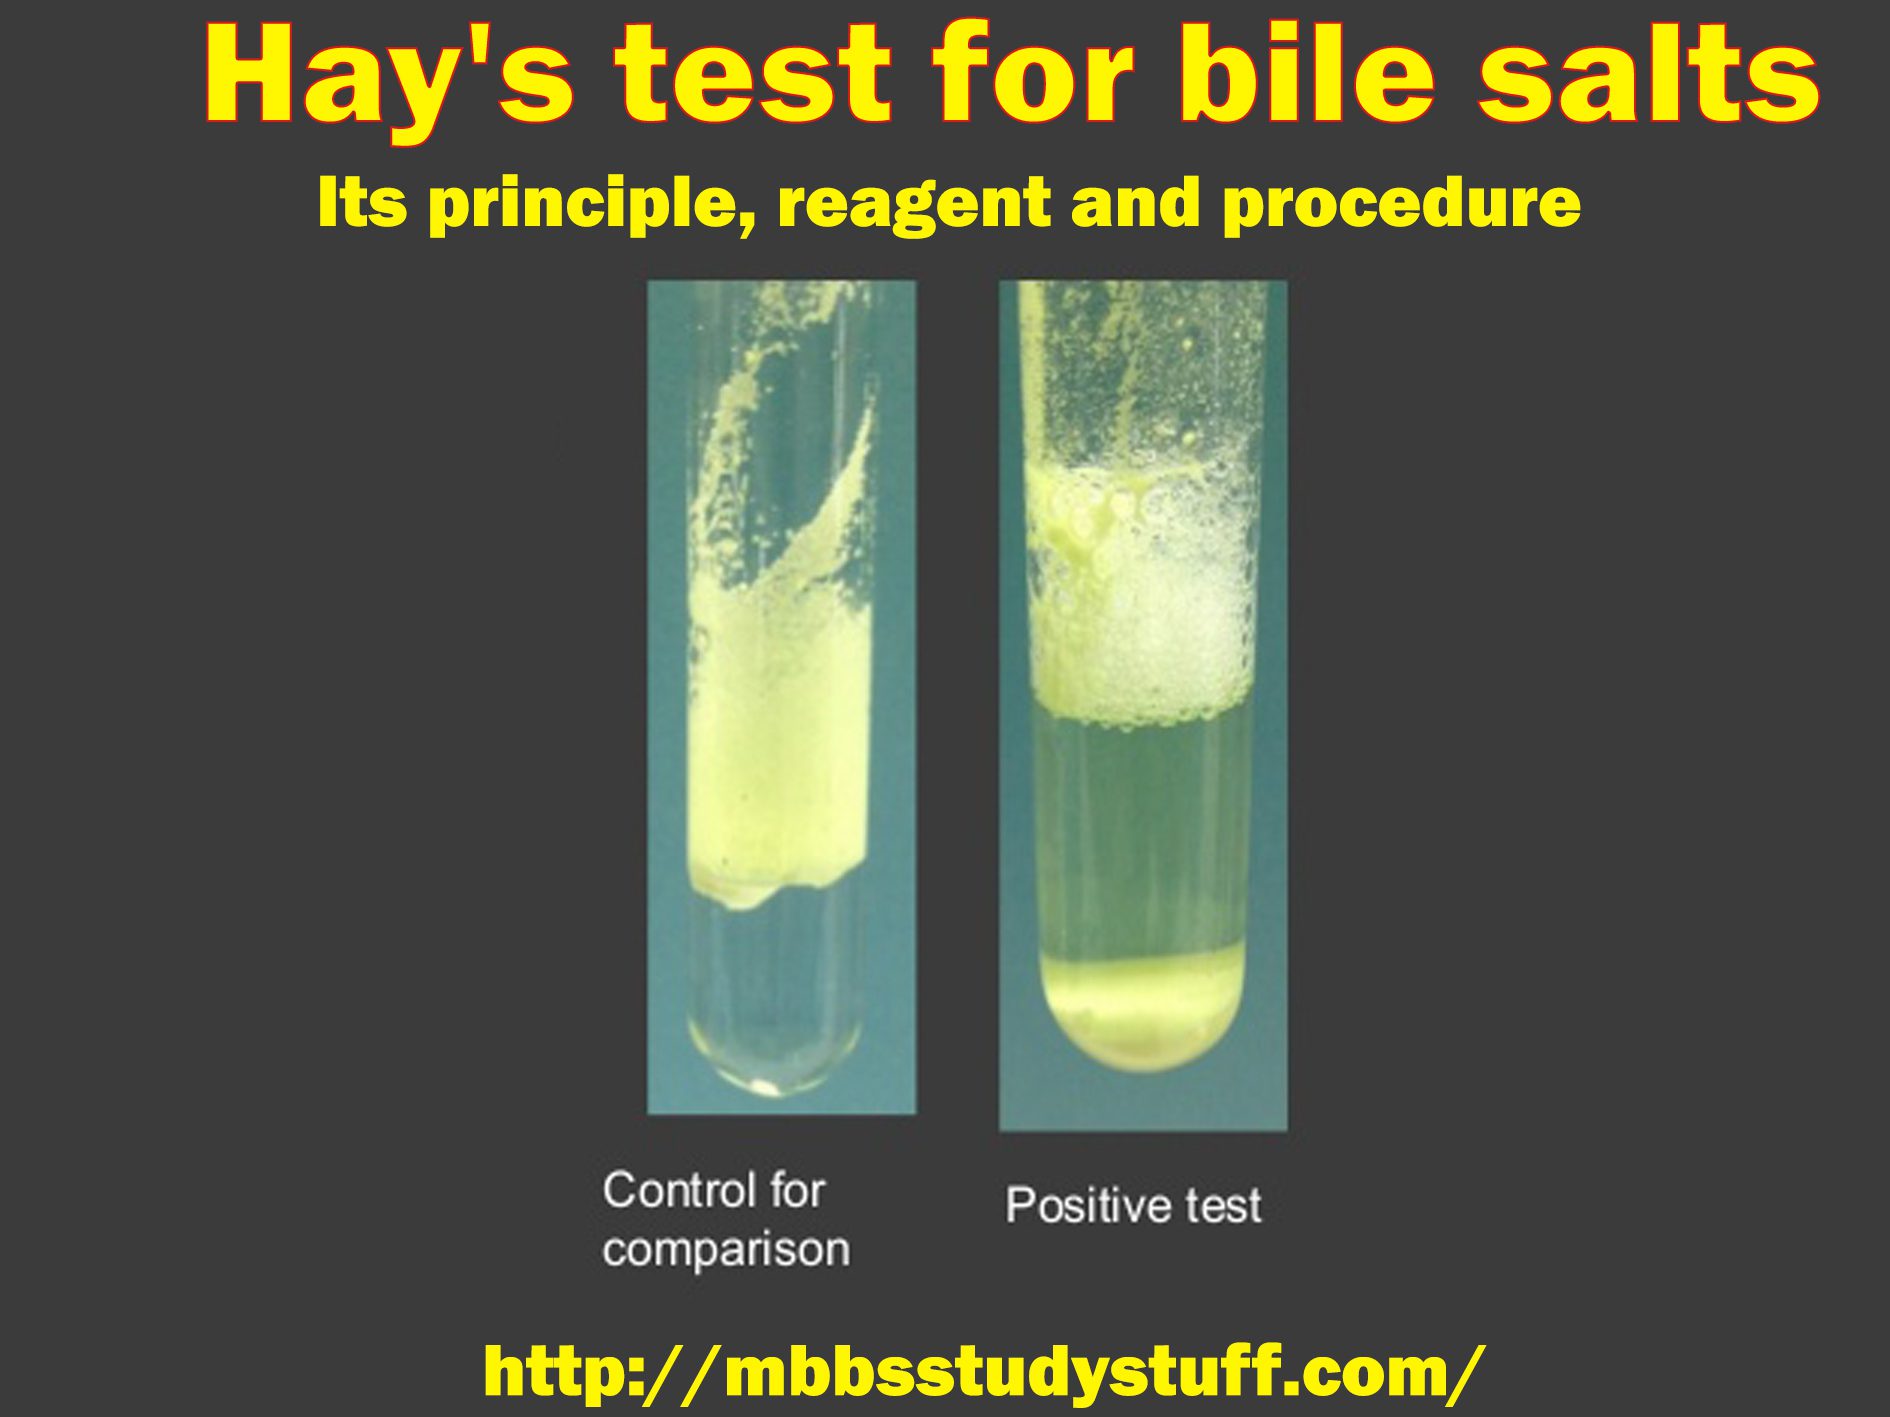 Hay's test for bile salts - Its principle, reagent and procedure